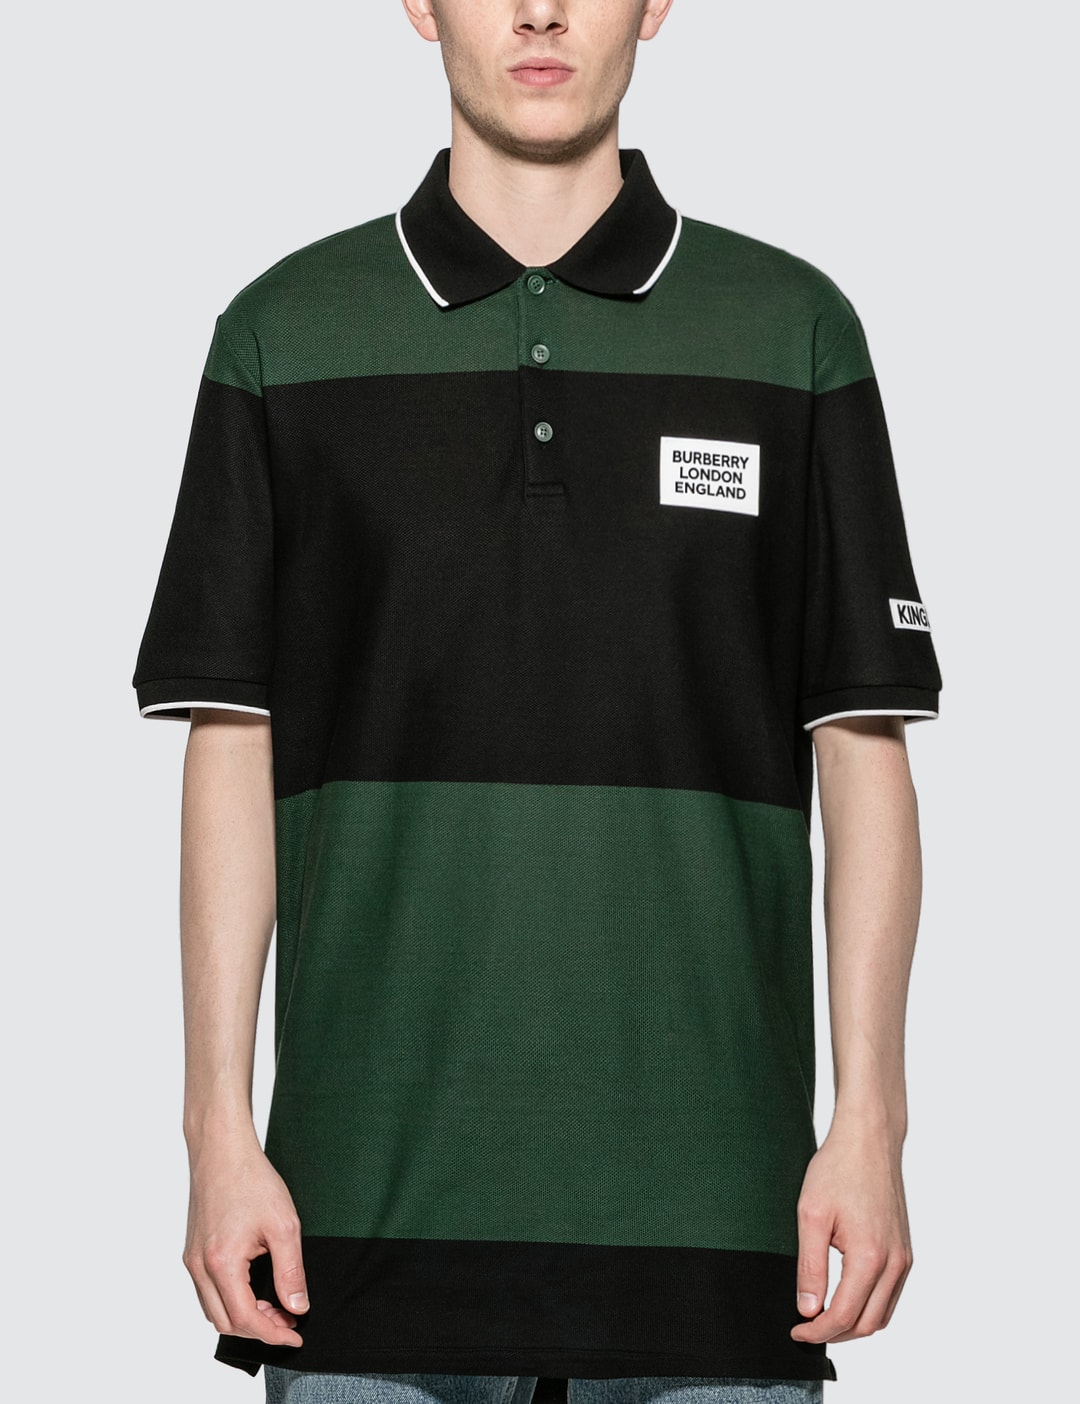 Burberry - Logo Appliqué Cotton Polo Shirt | HBX - Globally Curated Fashion and Lifestyle by Hypebeast